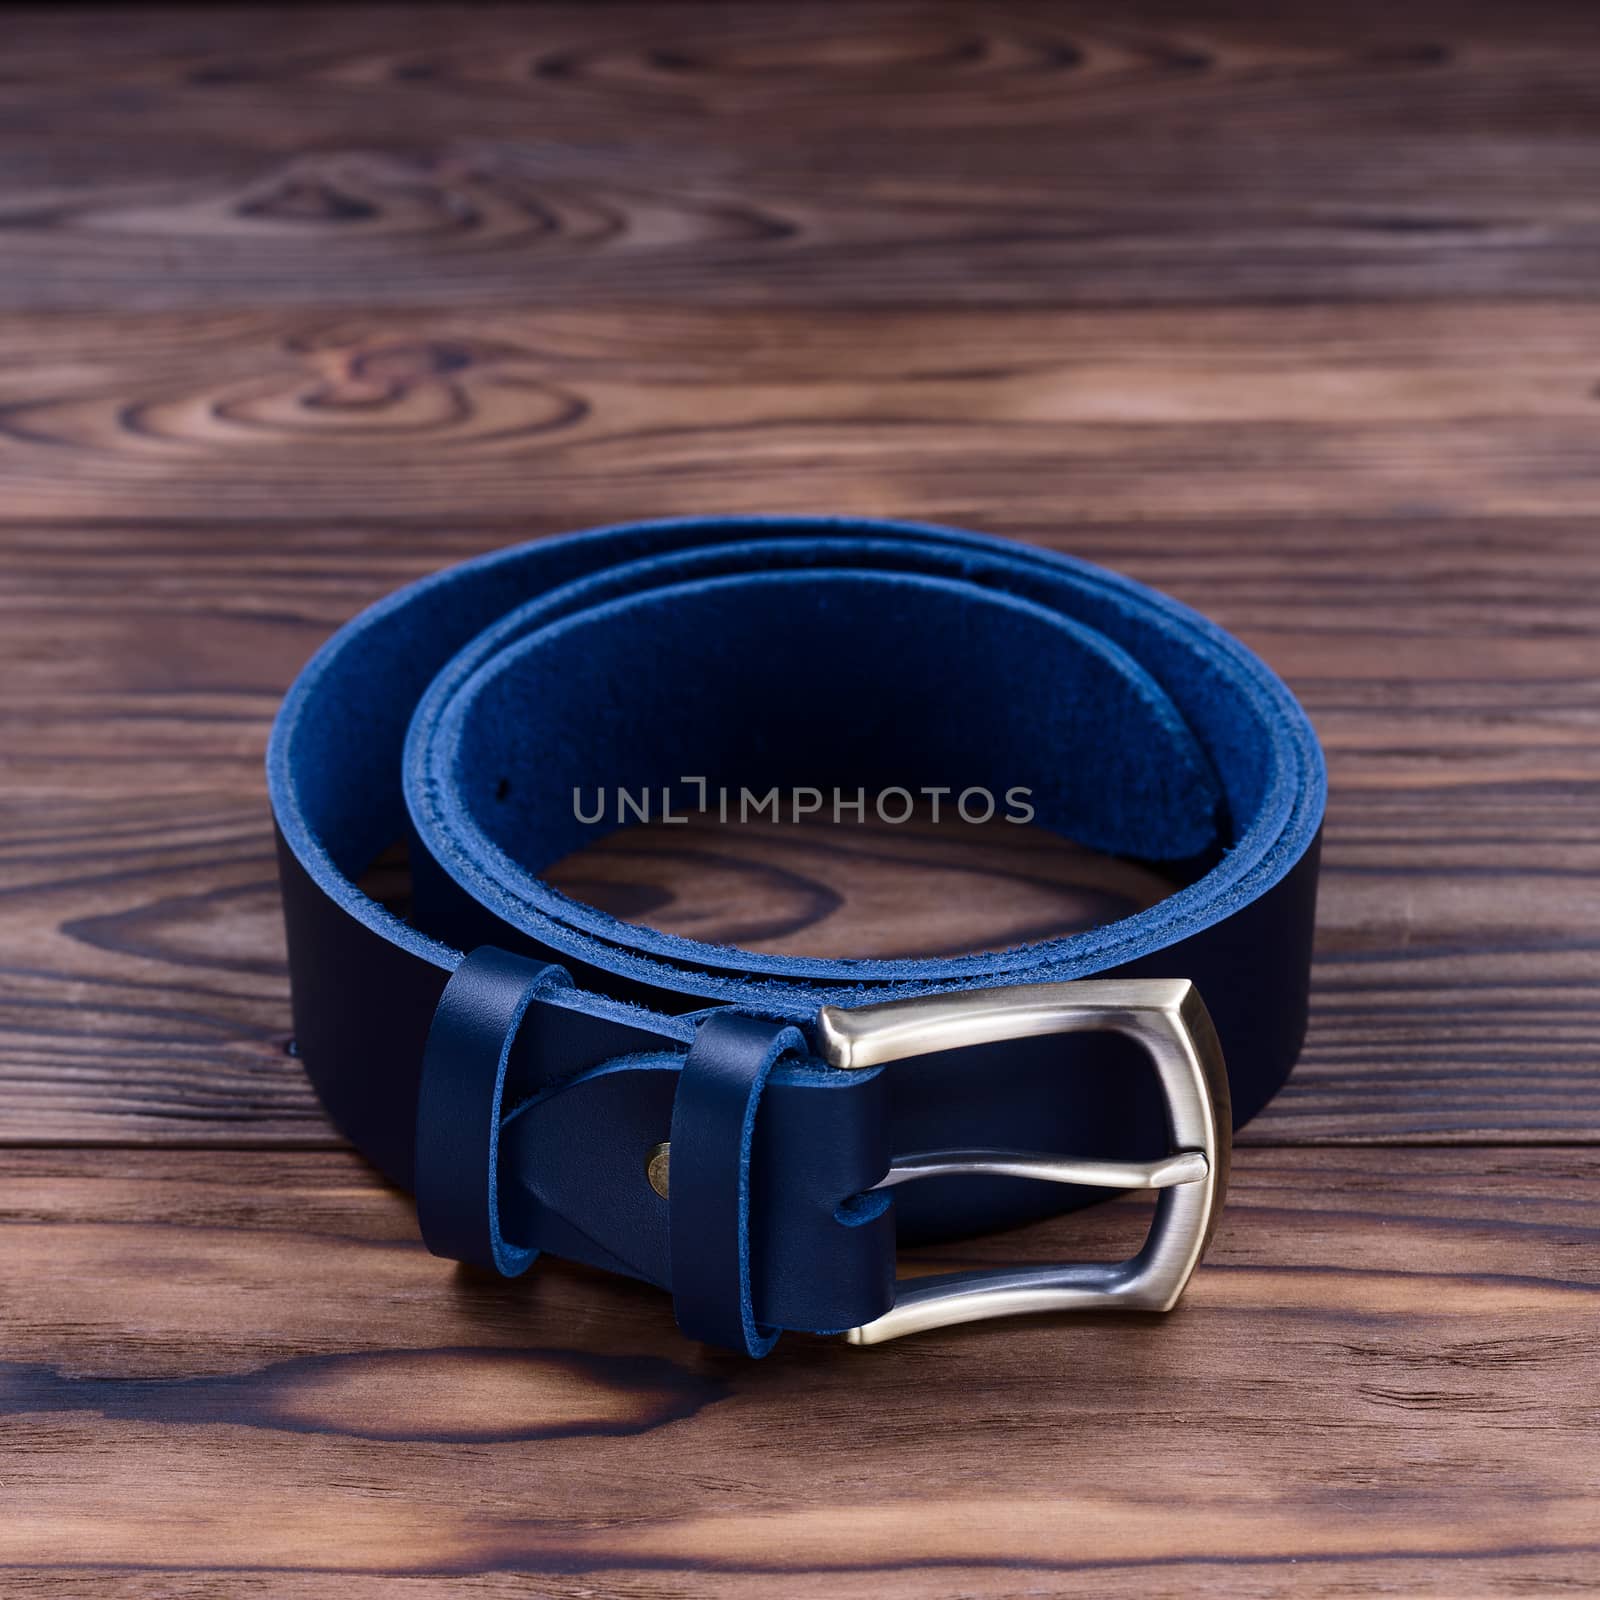 Blue color handmade belt lies on textured wooden background. The belt is twisted into a ring. Closeup side view. Stock photo of businessman accessories. by alexsdriver